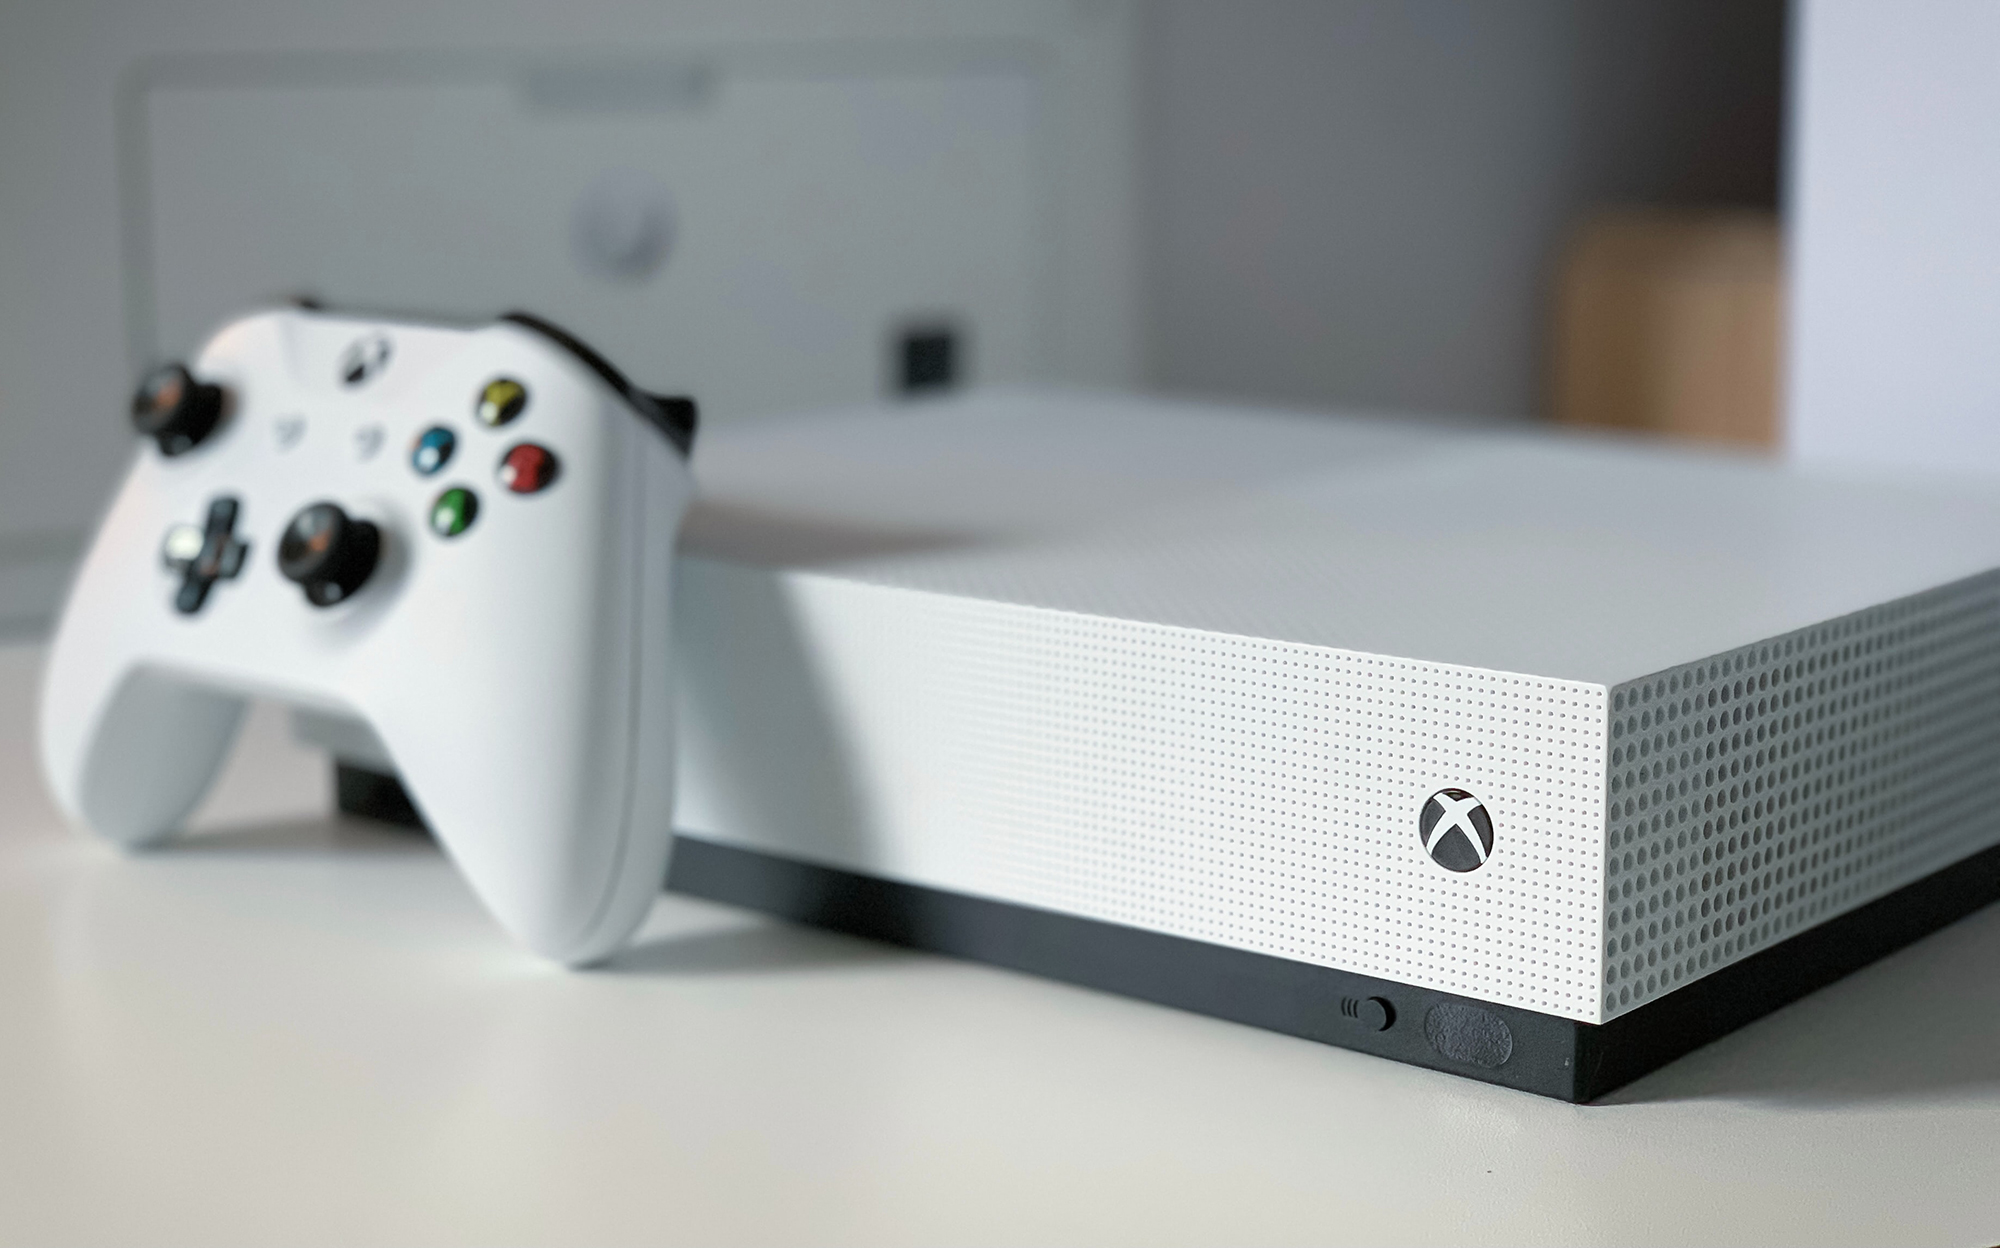 At $250, the price is finally right for Xbox Series S